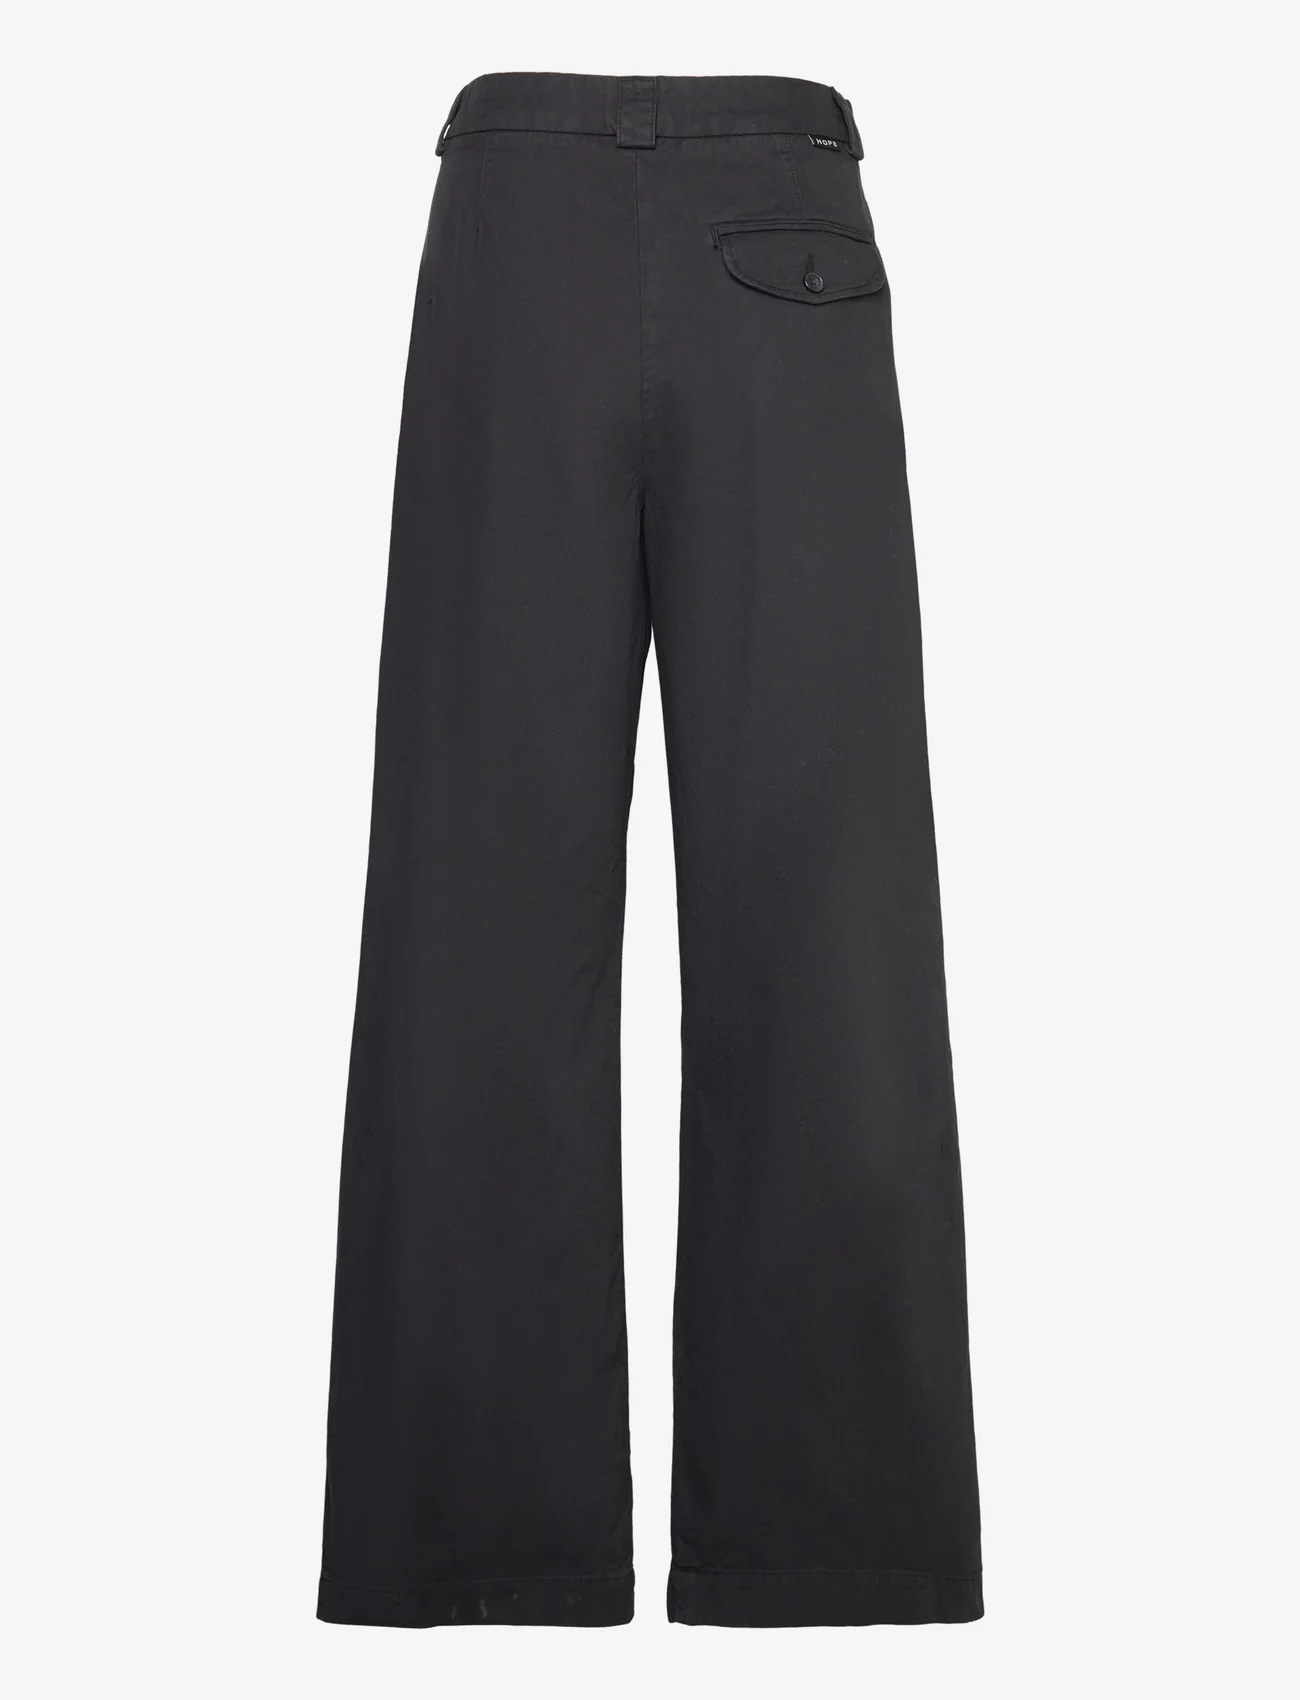 Hope - Relaxed Pleated Chinos - faded black chino - 1